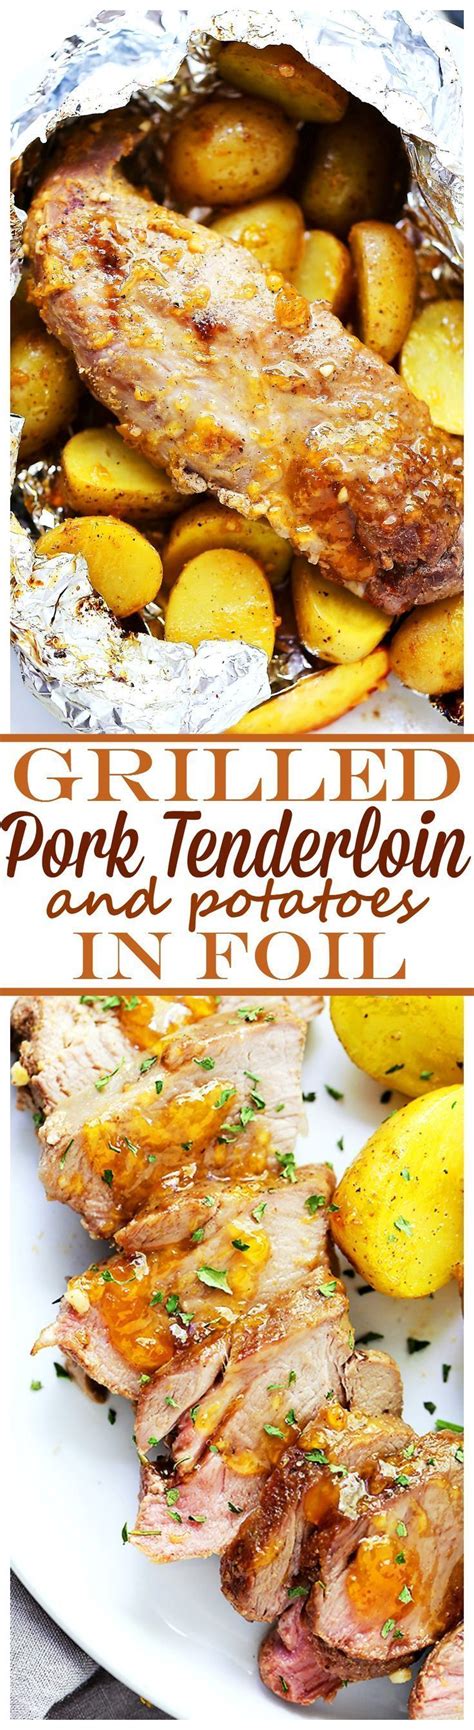 This greek stuffed prosciutto & fig jam pork loin roll may sound and look intimidating, but it's actually simple an. Grilled pork tenderloin with potatoes - Glacé à la ...